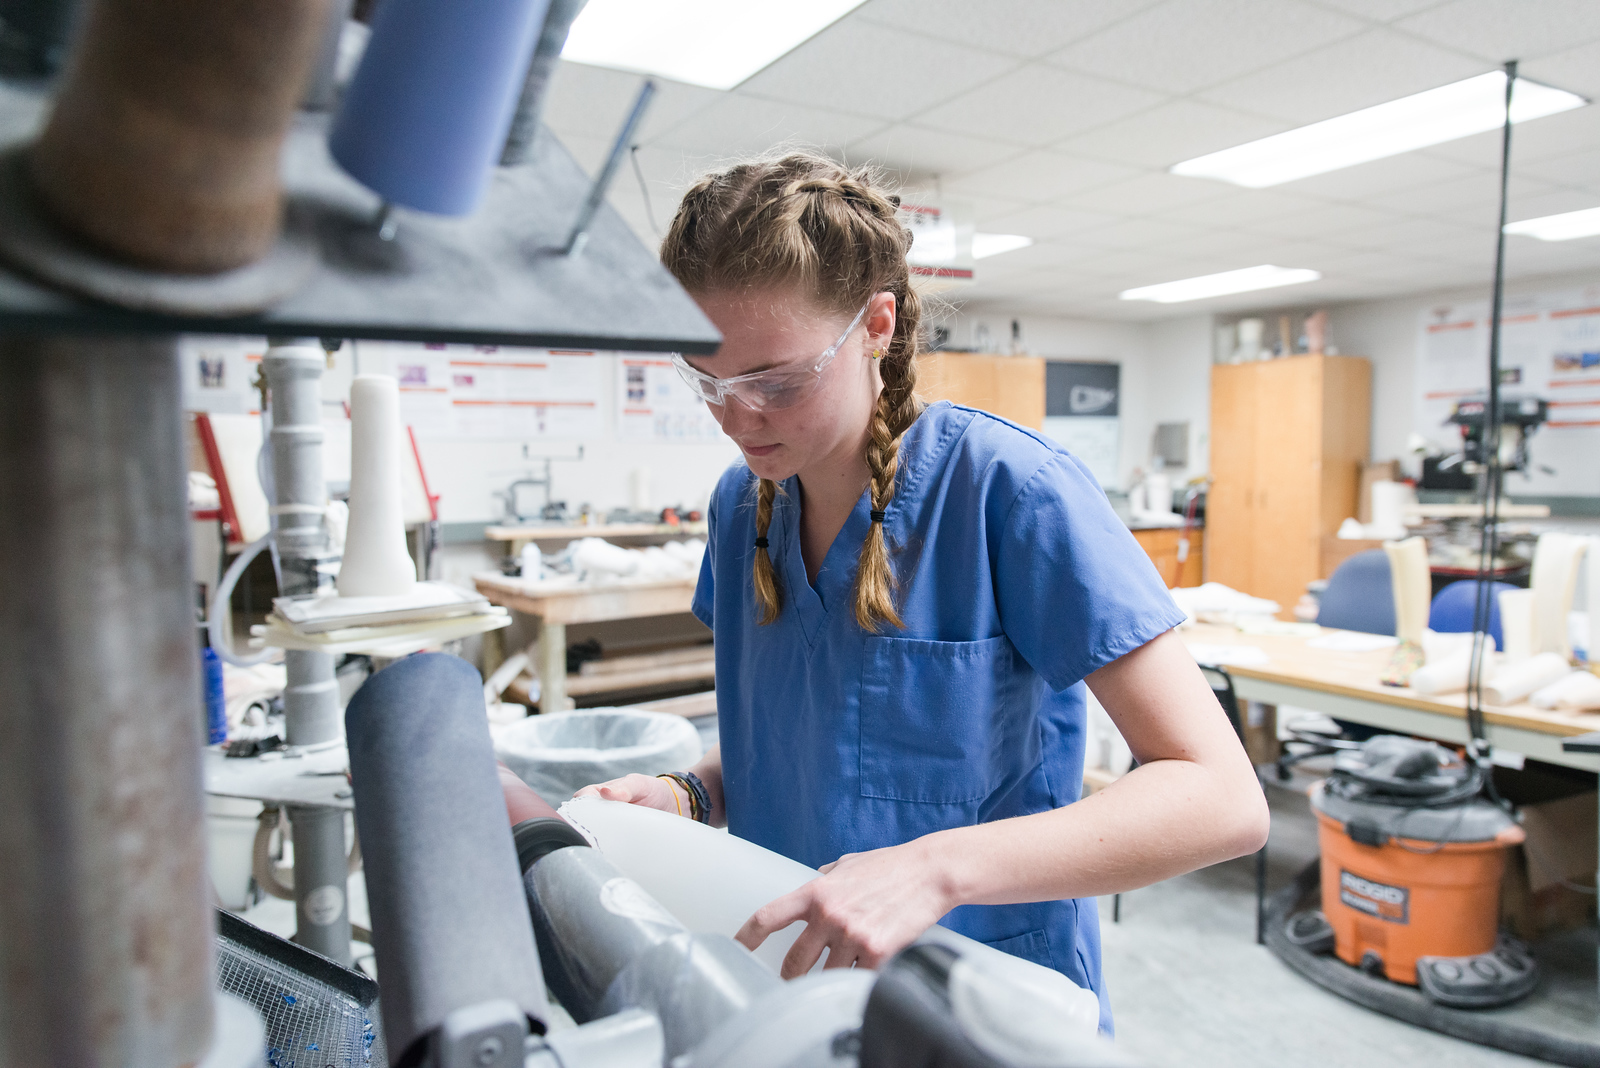 Mercer University student in engineering lab working with prosthetic